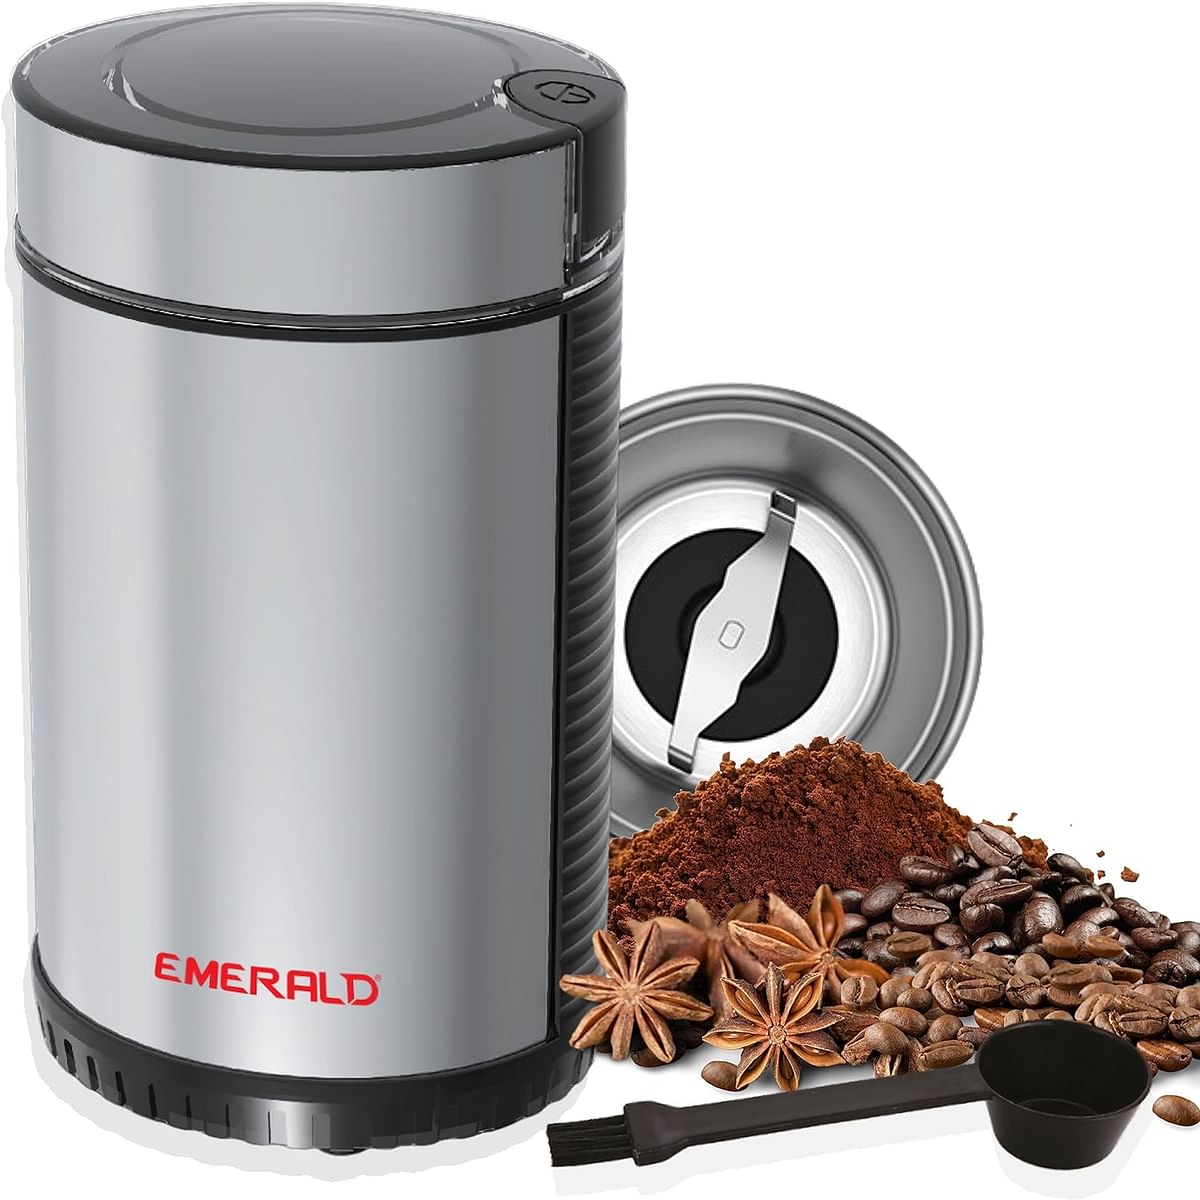 EMERALD Coffee & Spices Grinder with Stainless Steel Body & Detachable Cup, 90 Grams Capacity, 150Watts, EK792CG.